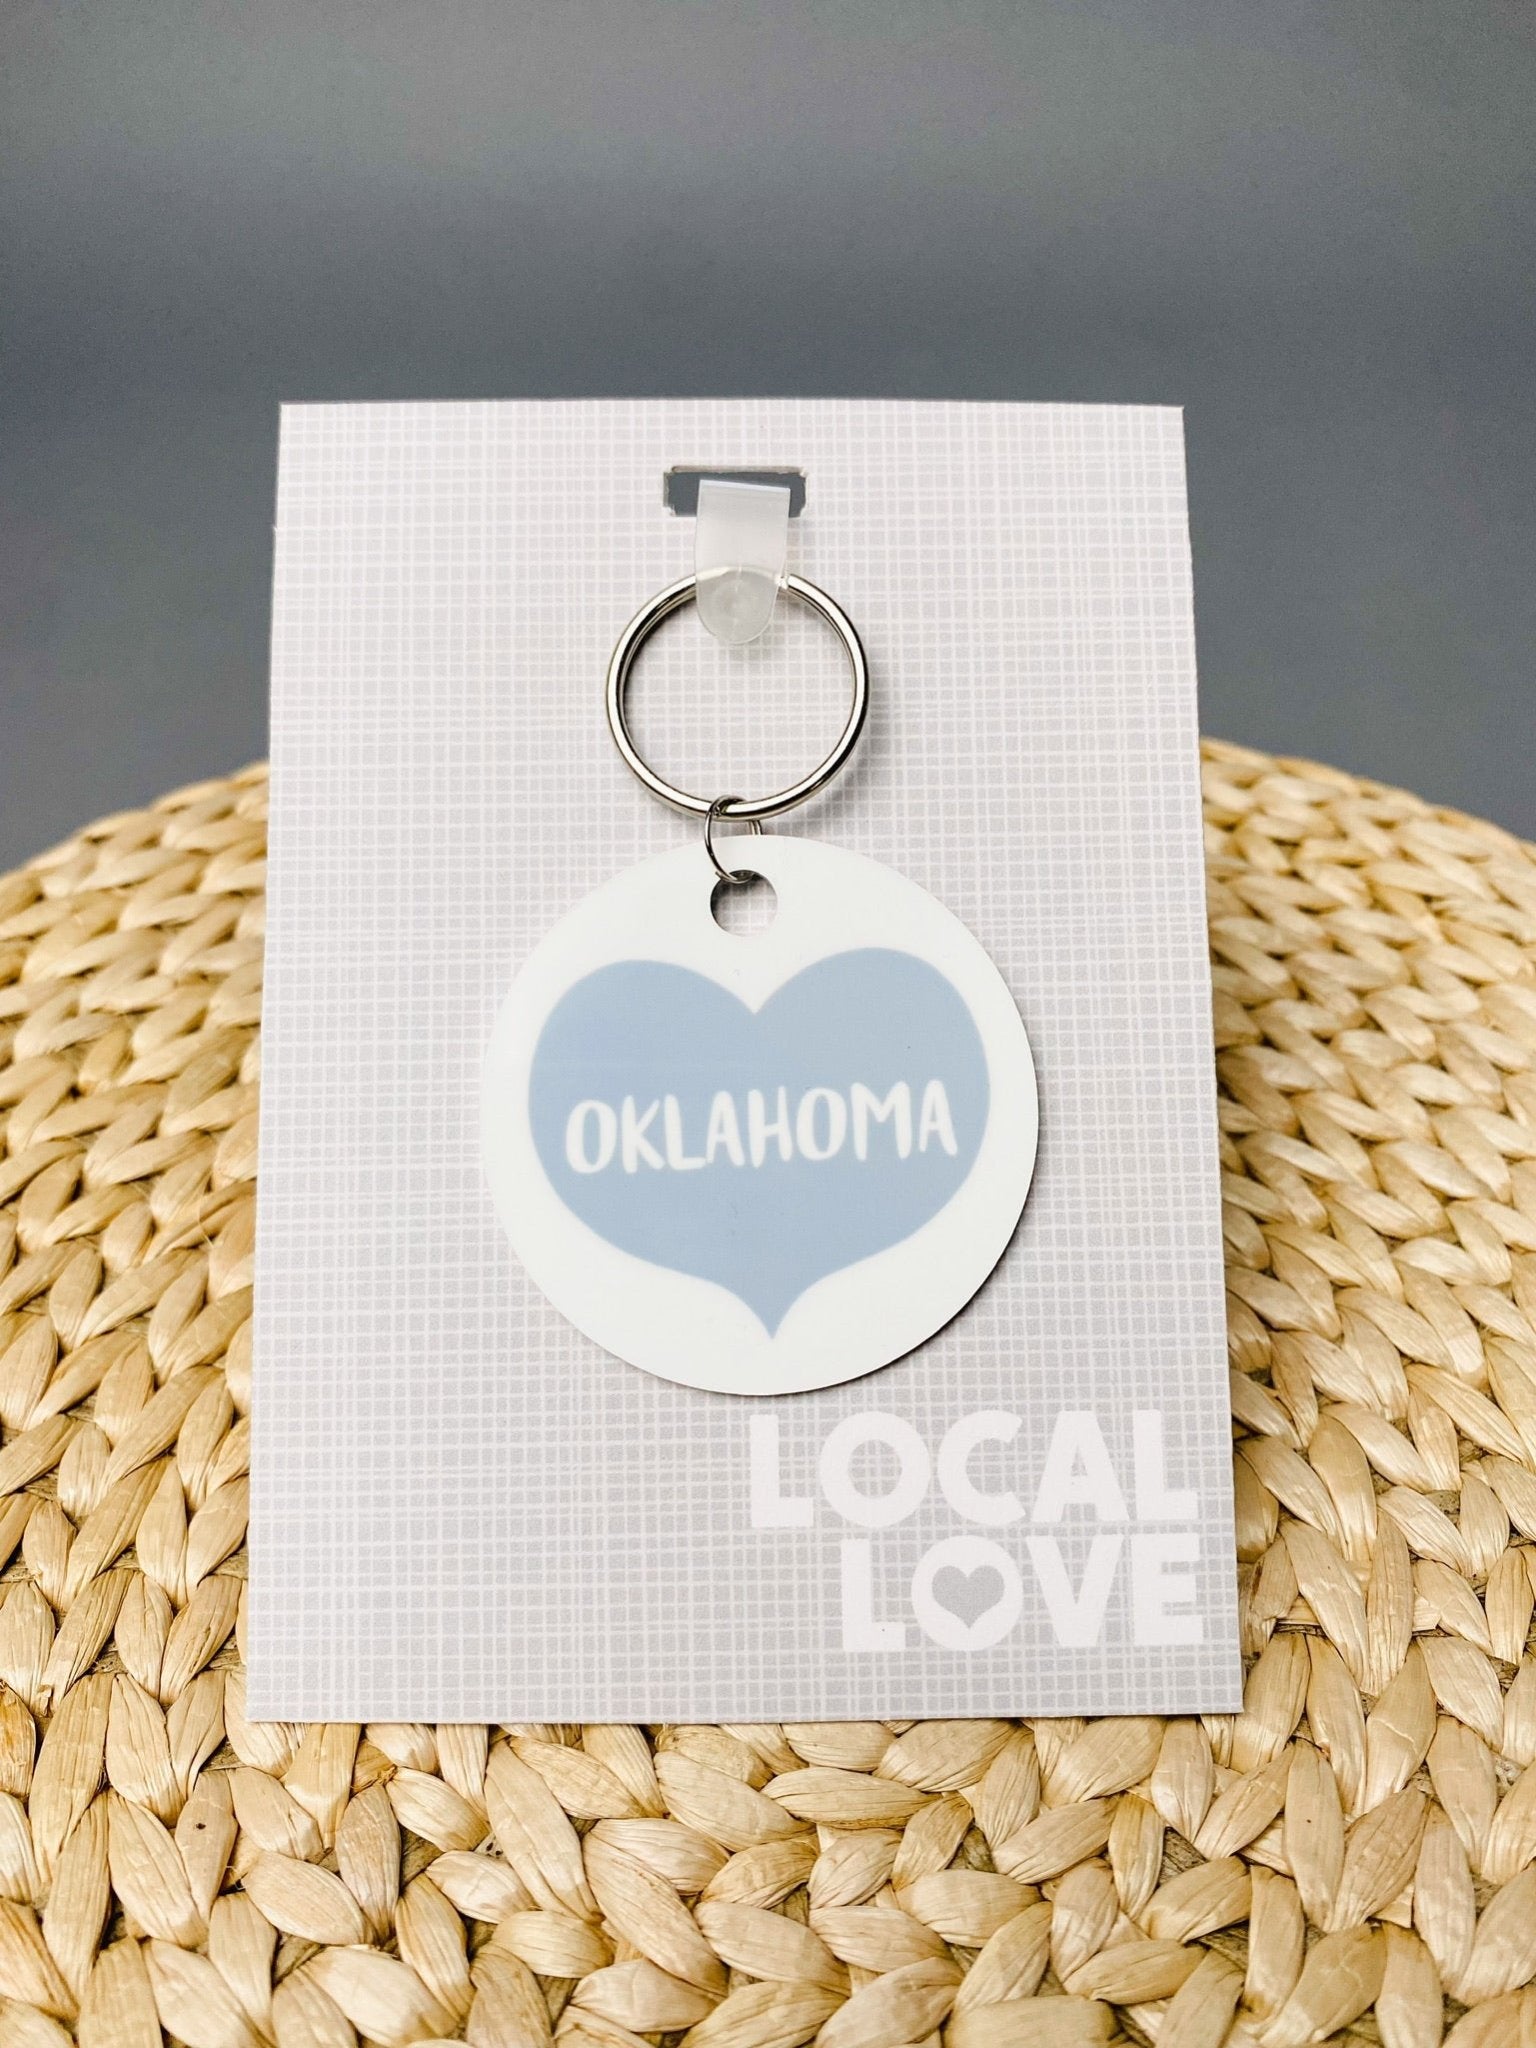 Oklahoma big heart keychain grey - Trendy Gifts at Lush Fashion Lounge Boutique in Oklahoma City